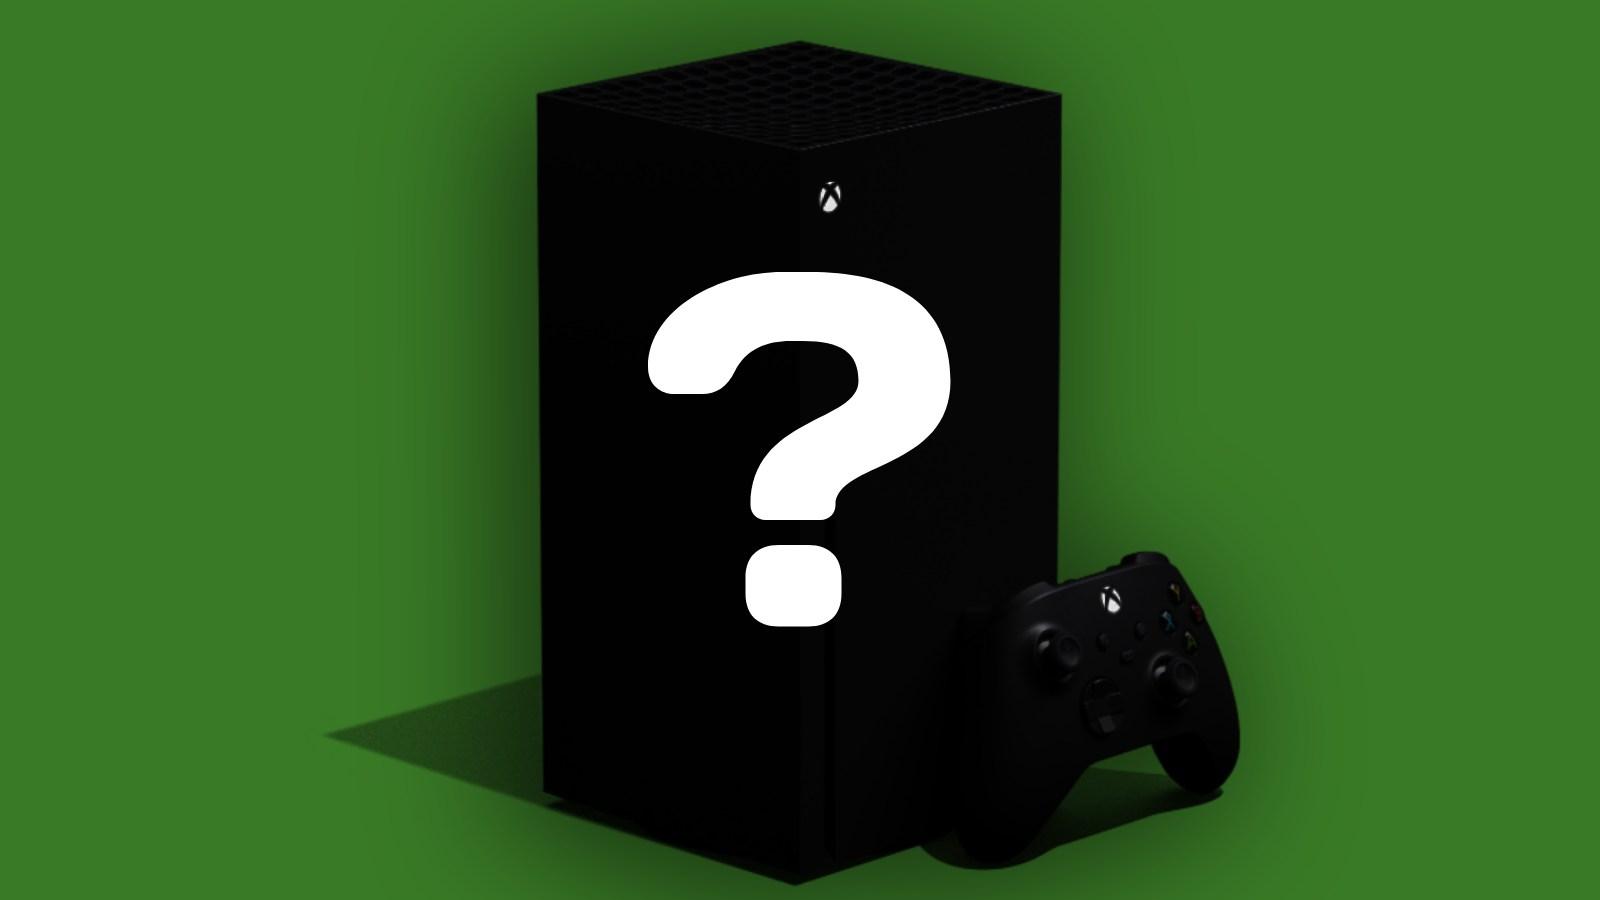 Xbox console with silhouette and question mark on it